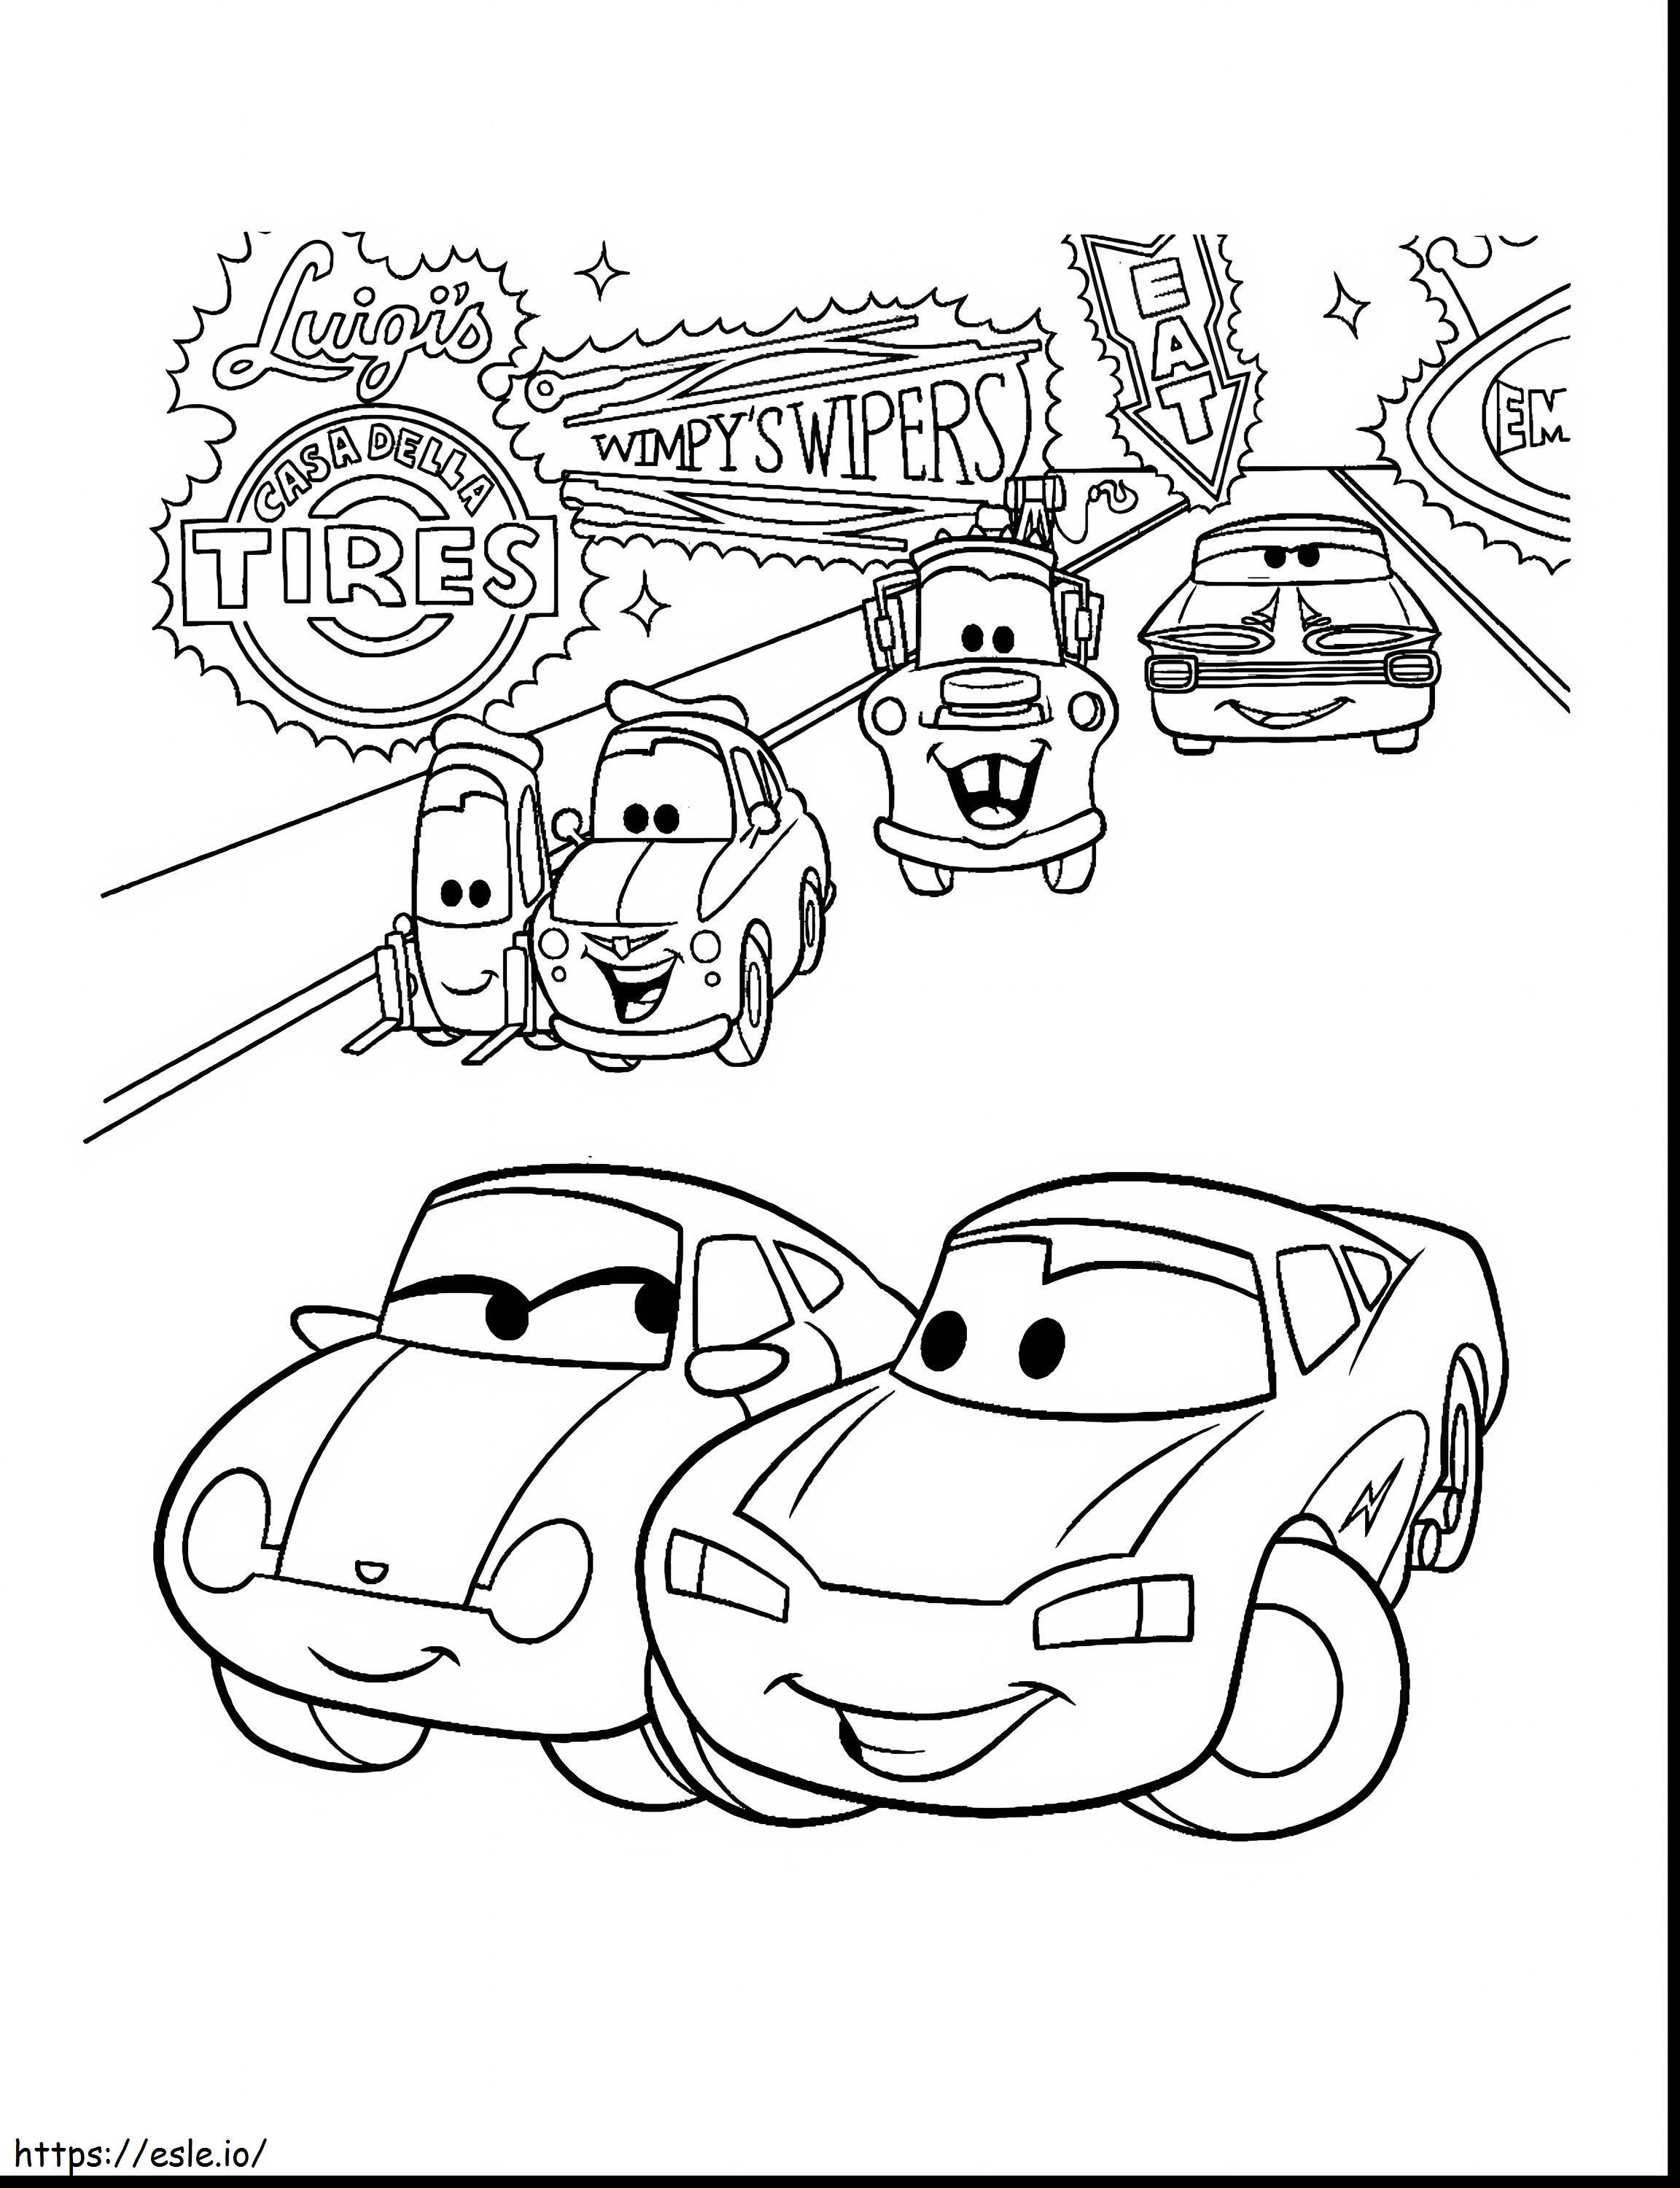  Magic Free Lightning Mcqueen Online Cars 2 Printable Collection Books para colorir